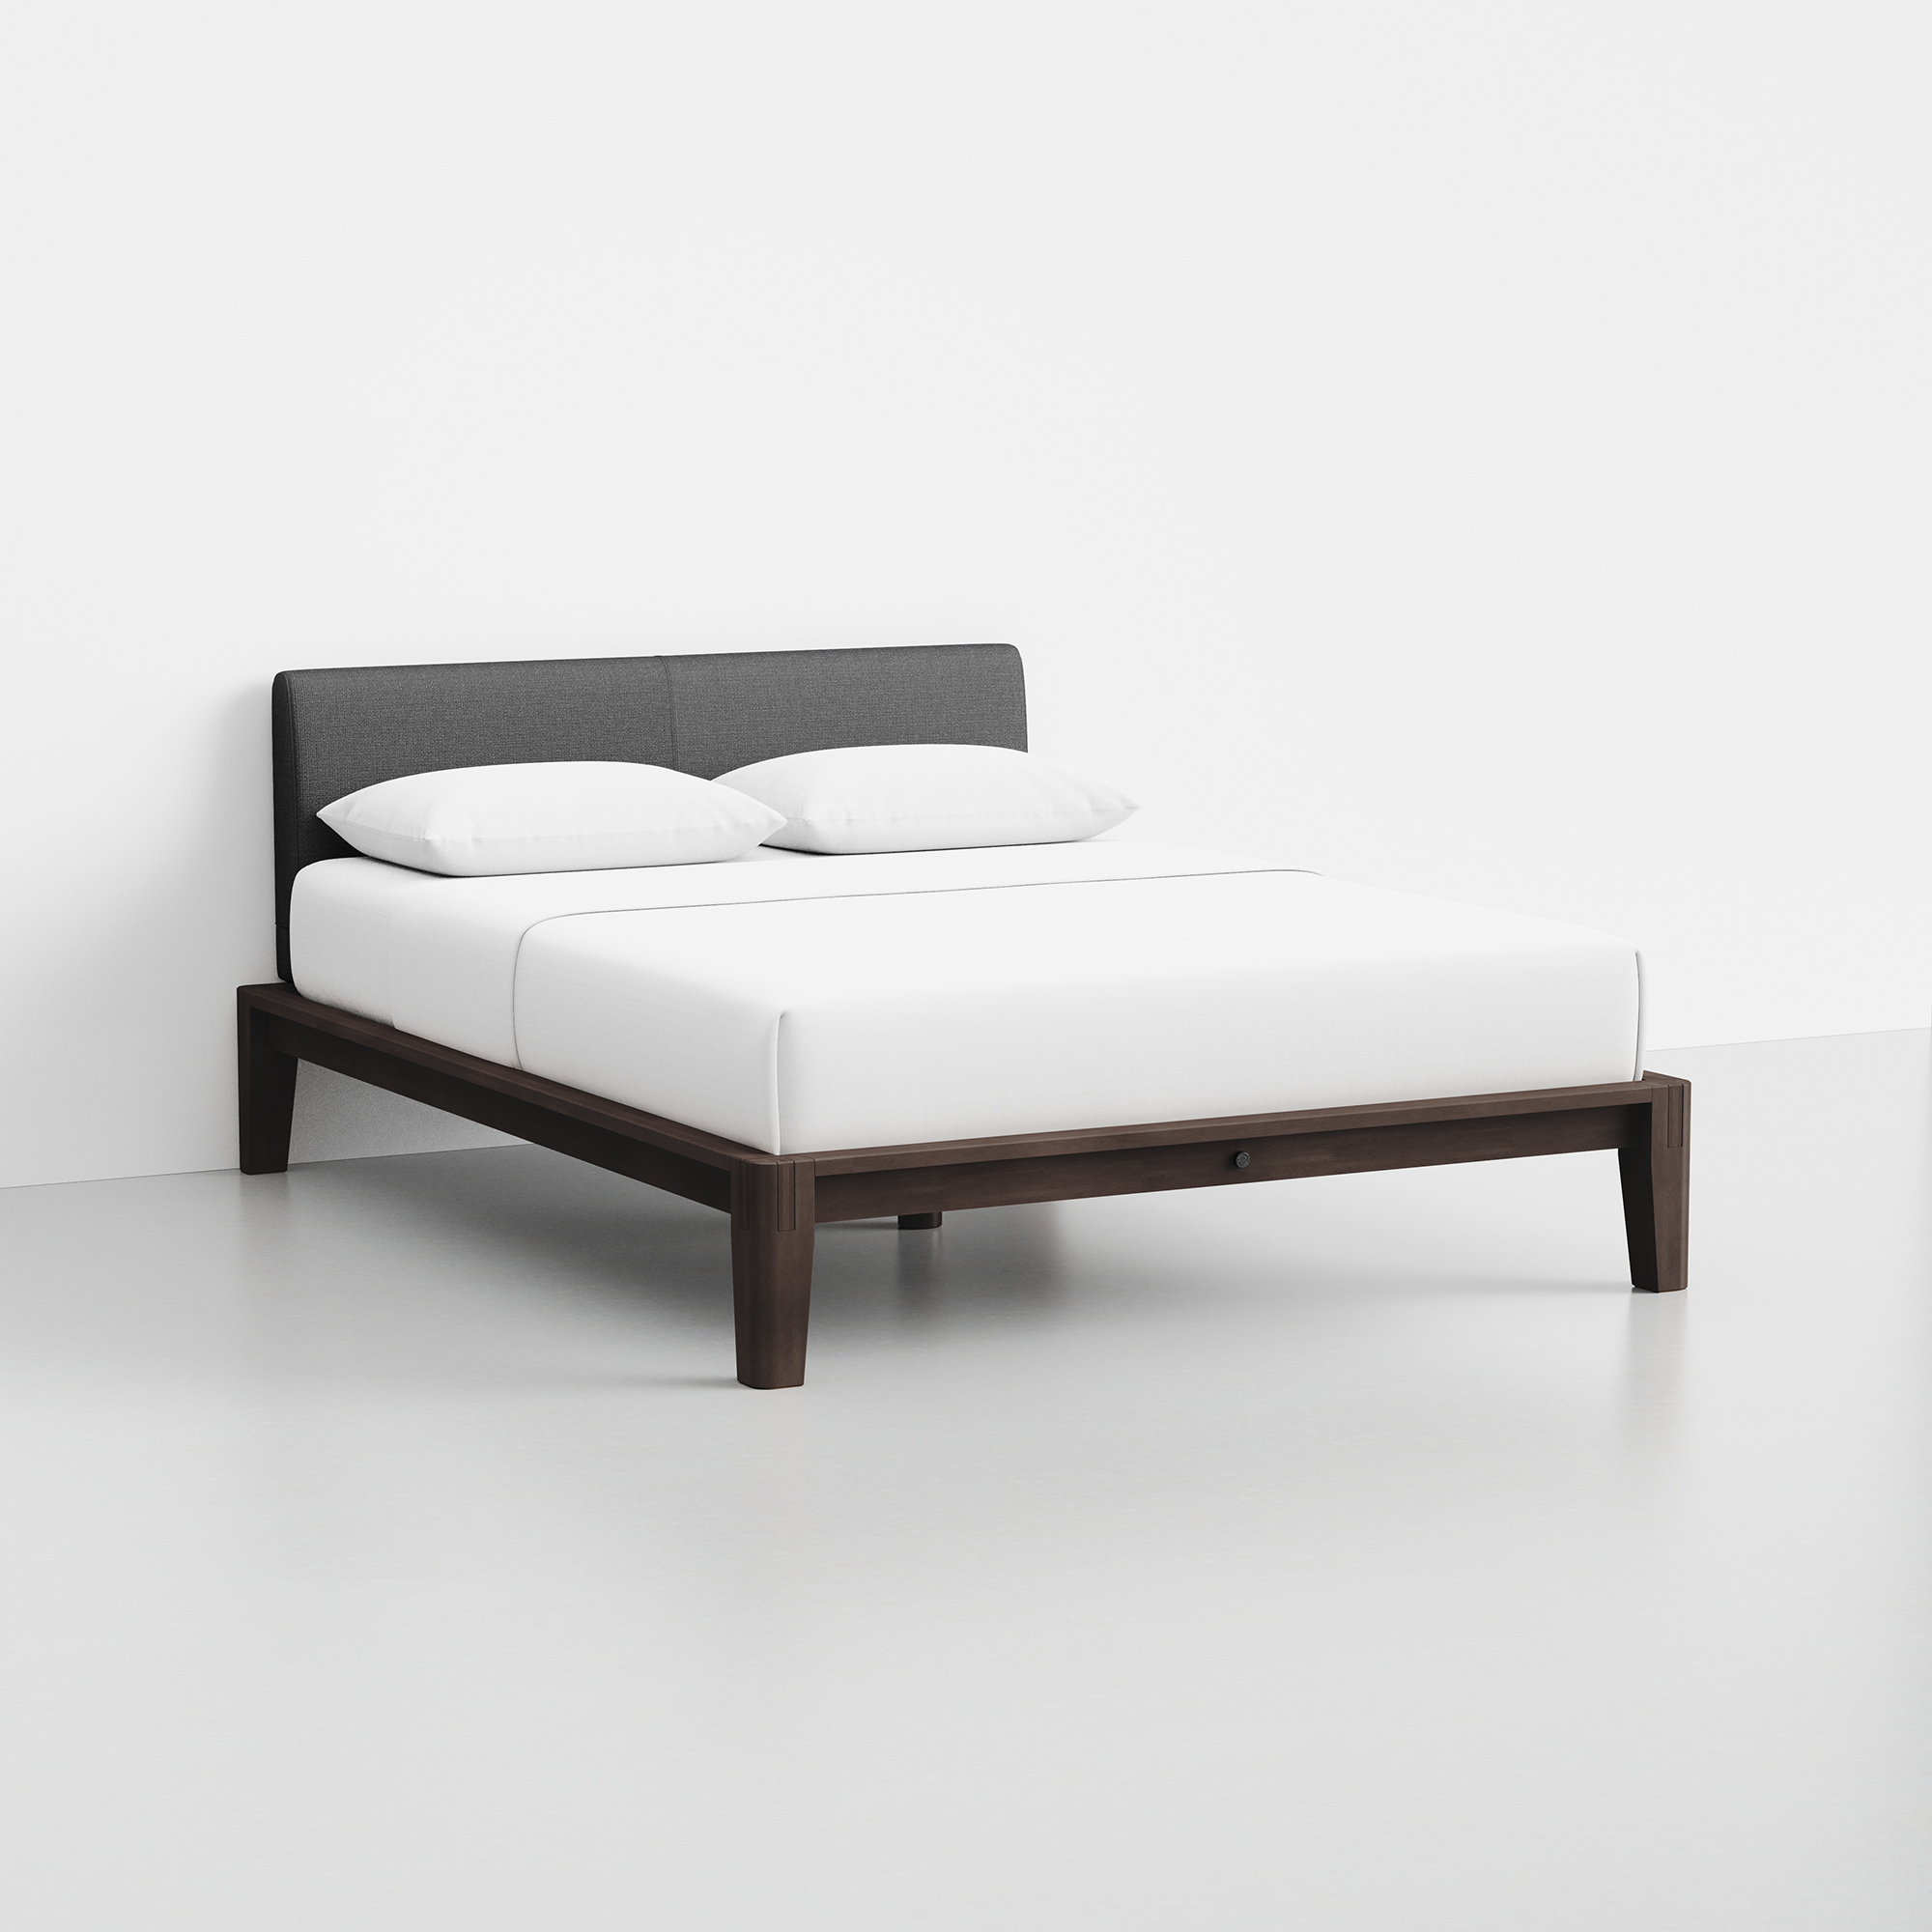 The Bed (Espresso / Dark Charcoal) - Render - Angled